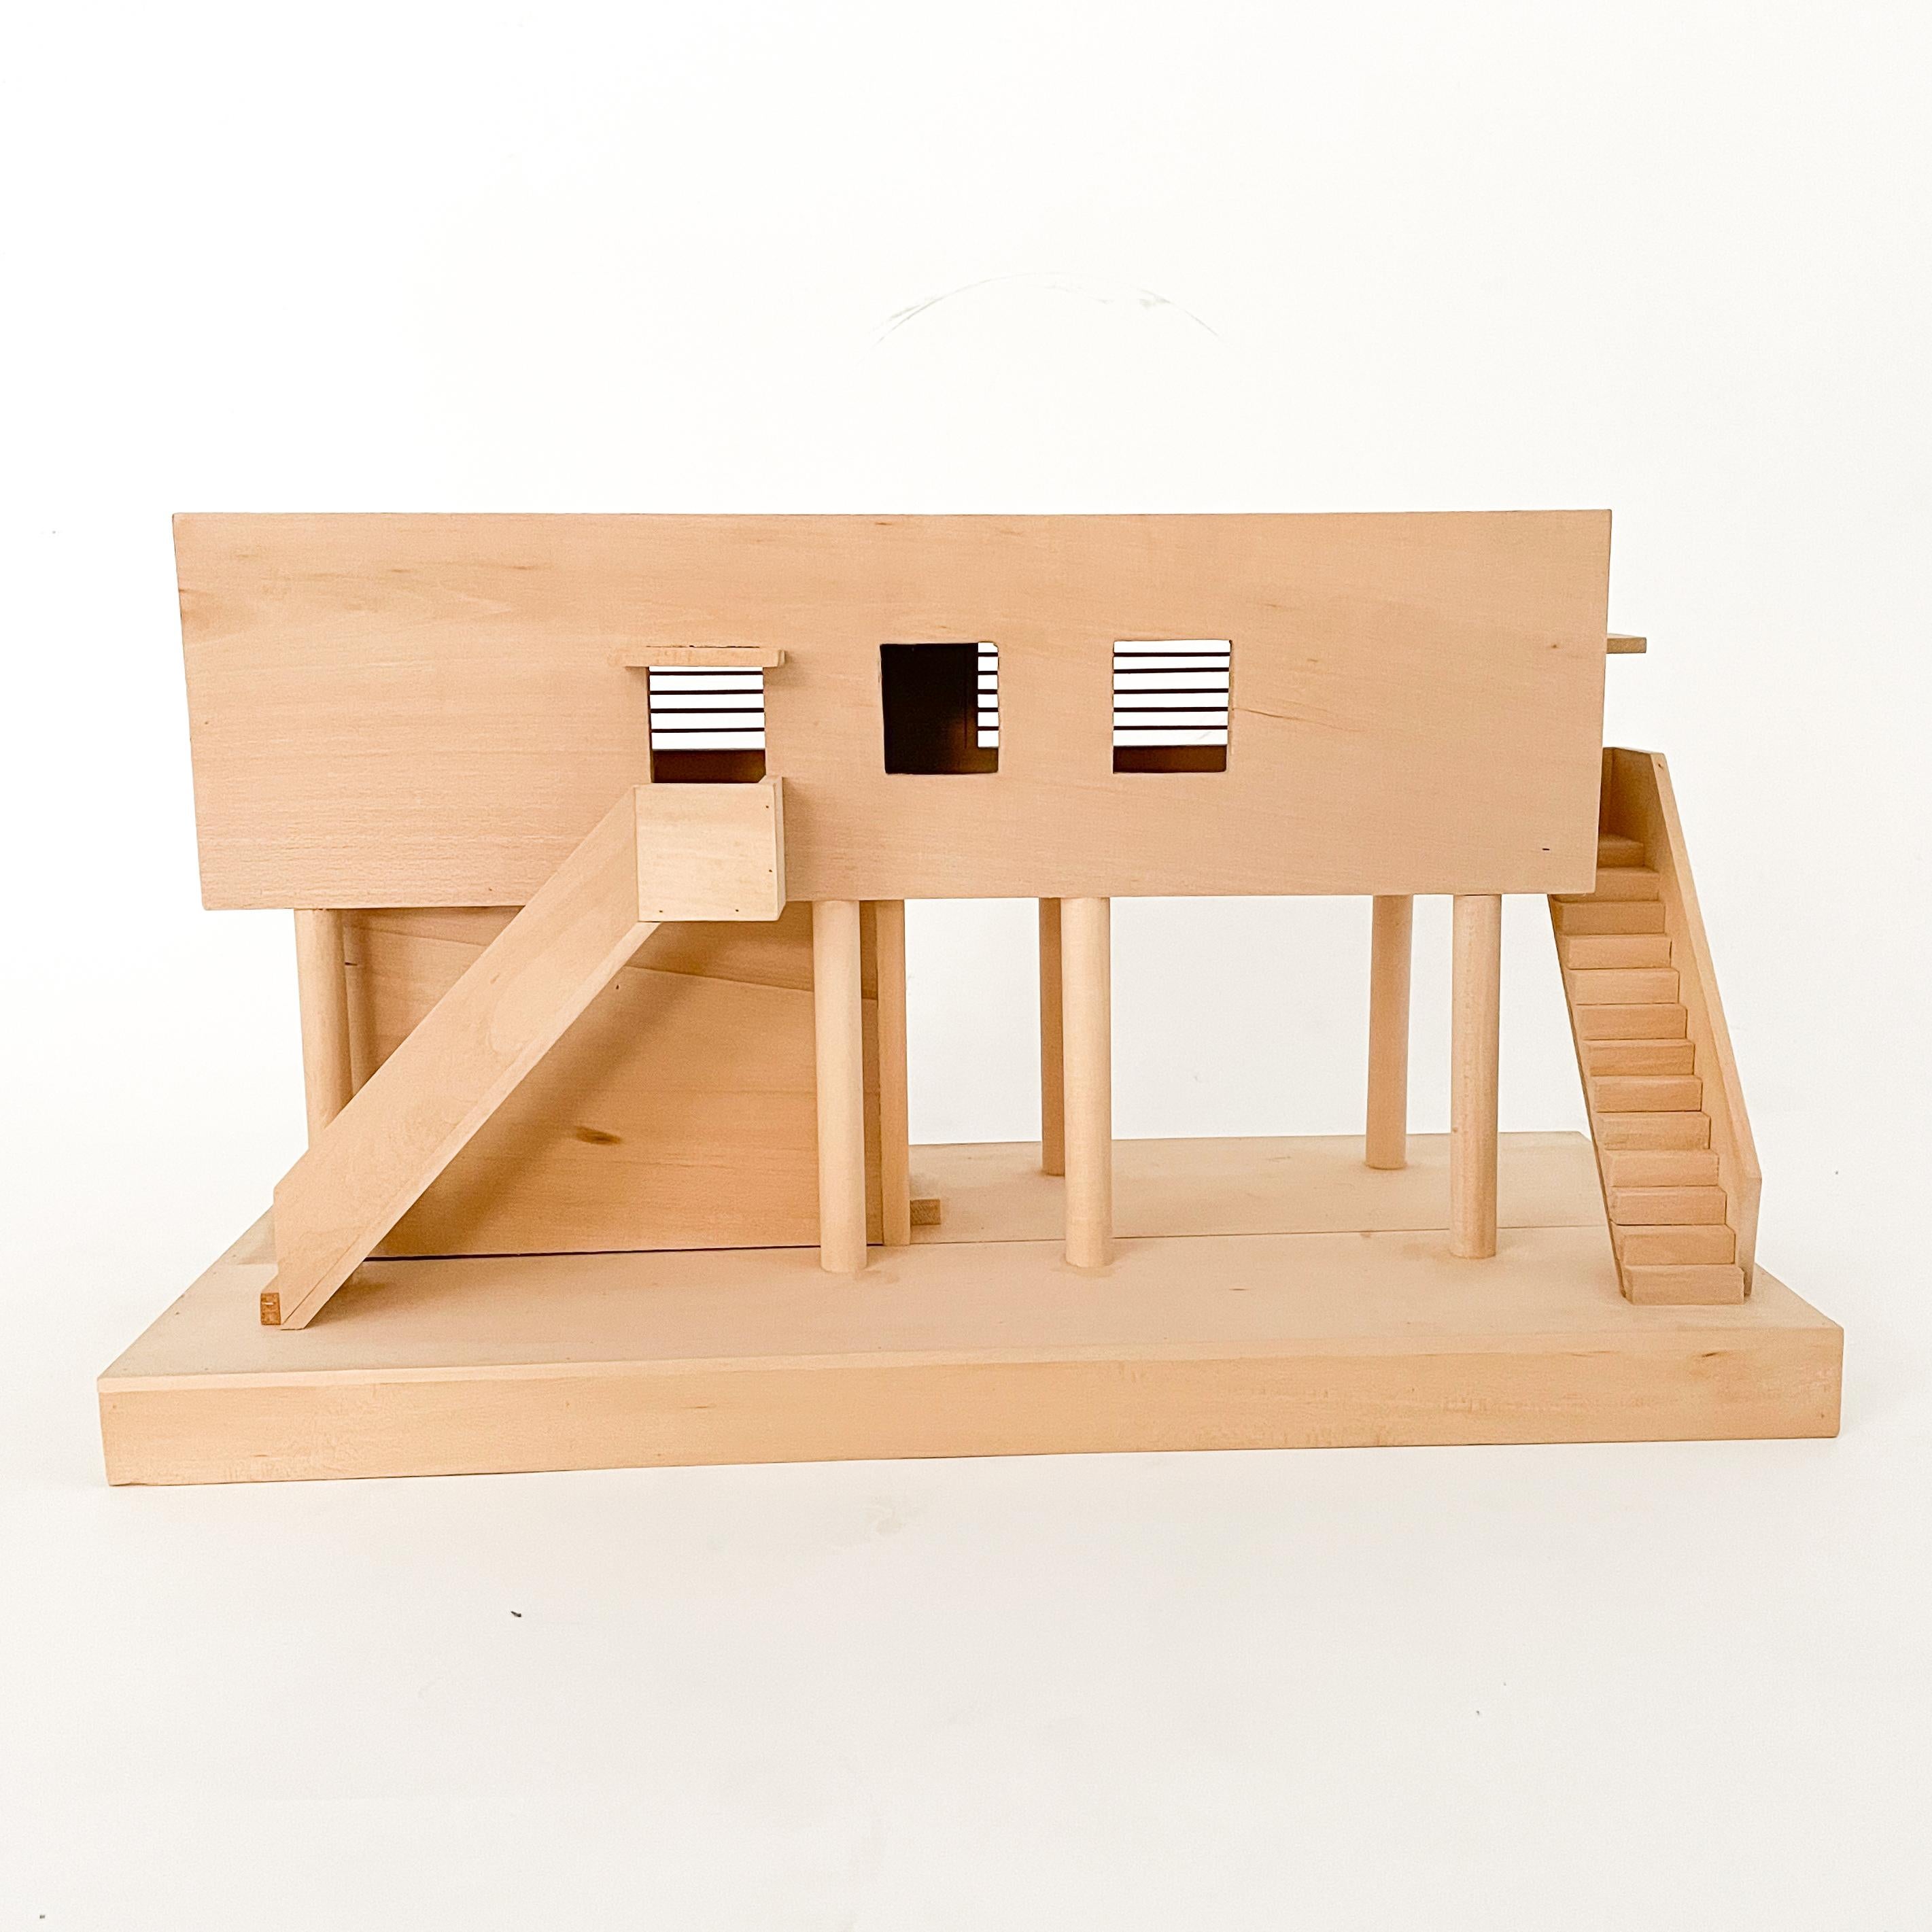 Architectural wood model of a modern home. Hand made with excellent craftsmanship.
Excellent vintage condition: Light soiling in the form of dust settling on natural, unfinished wood, but otherwise without any damage.
 